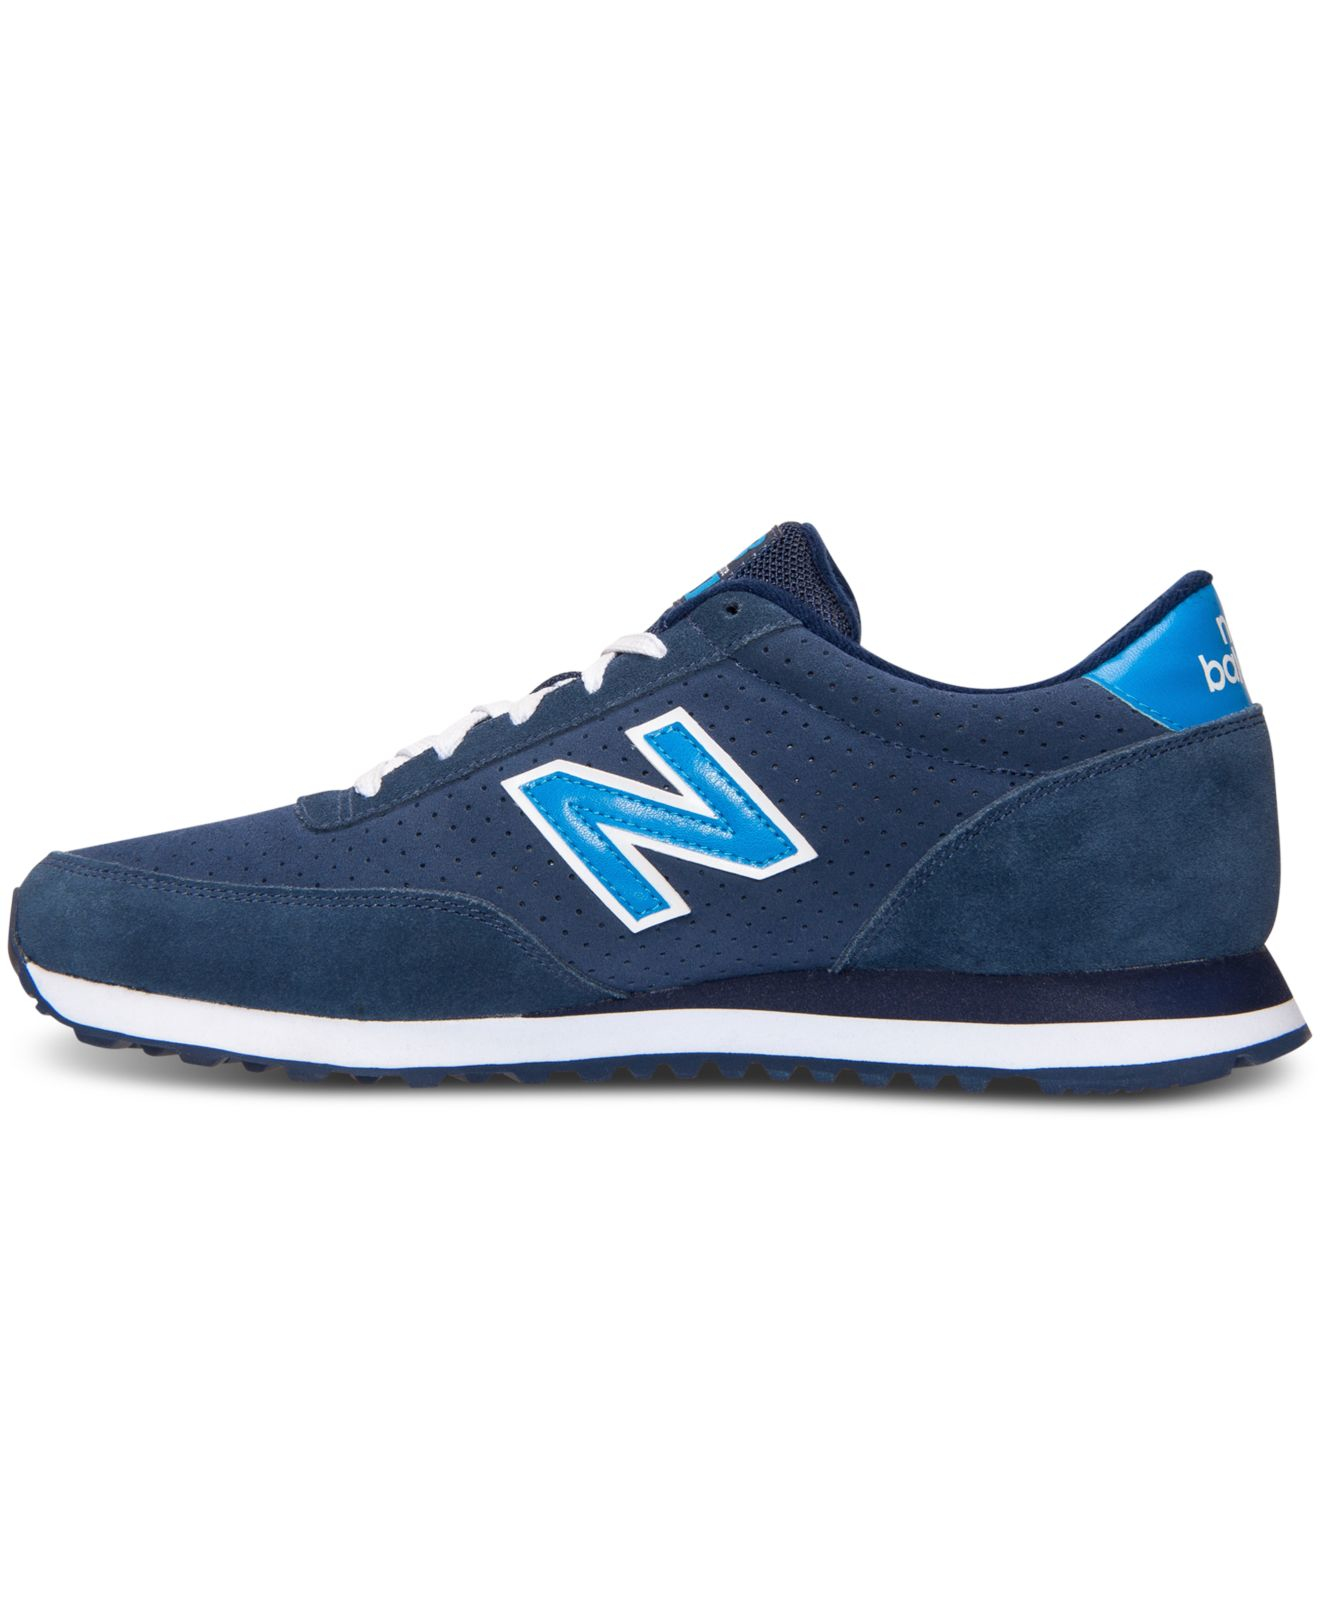 Lyst - New Balance Men's 501 Casual Sneakers From Finish Line in Blue ...